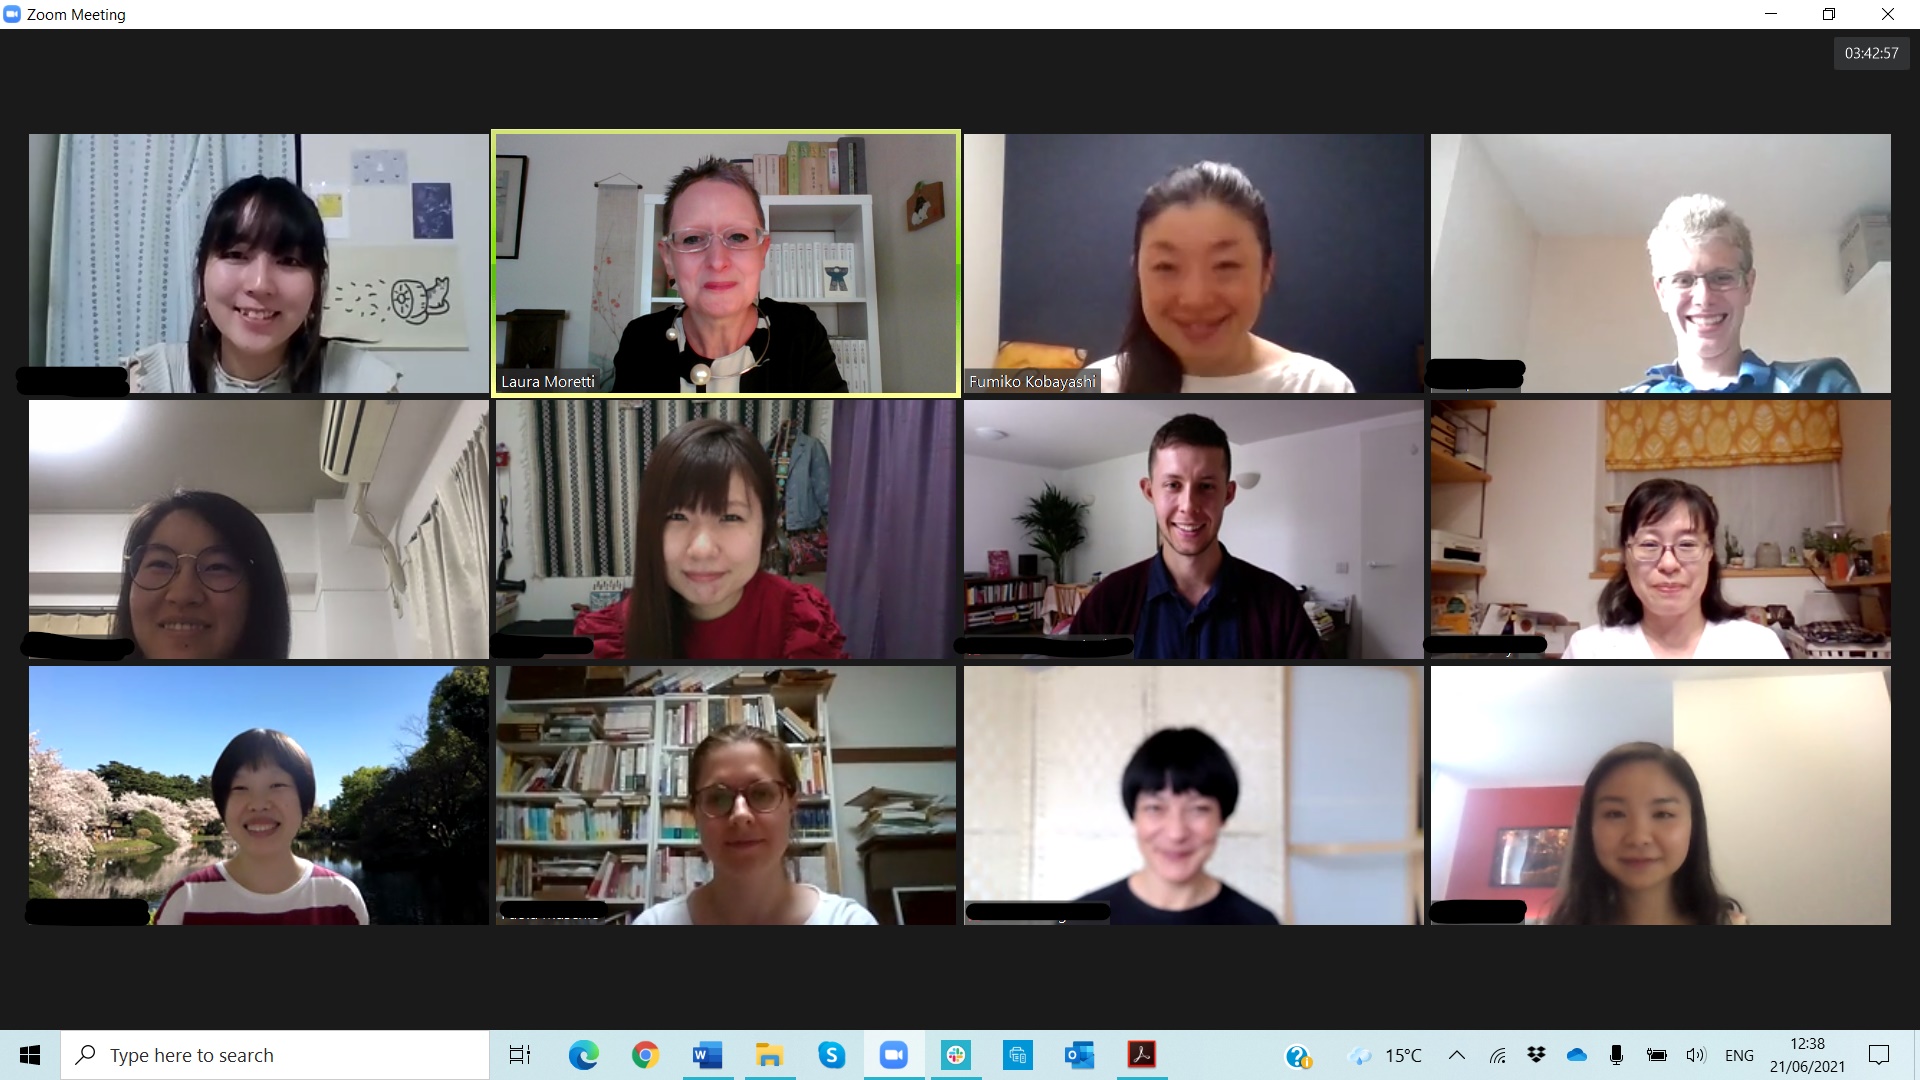 Image shows screenshot of Zoom meeting with 3 rows of participants, smiling